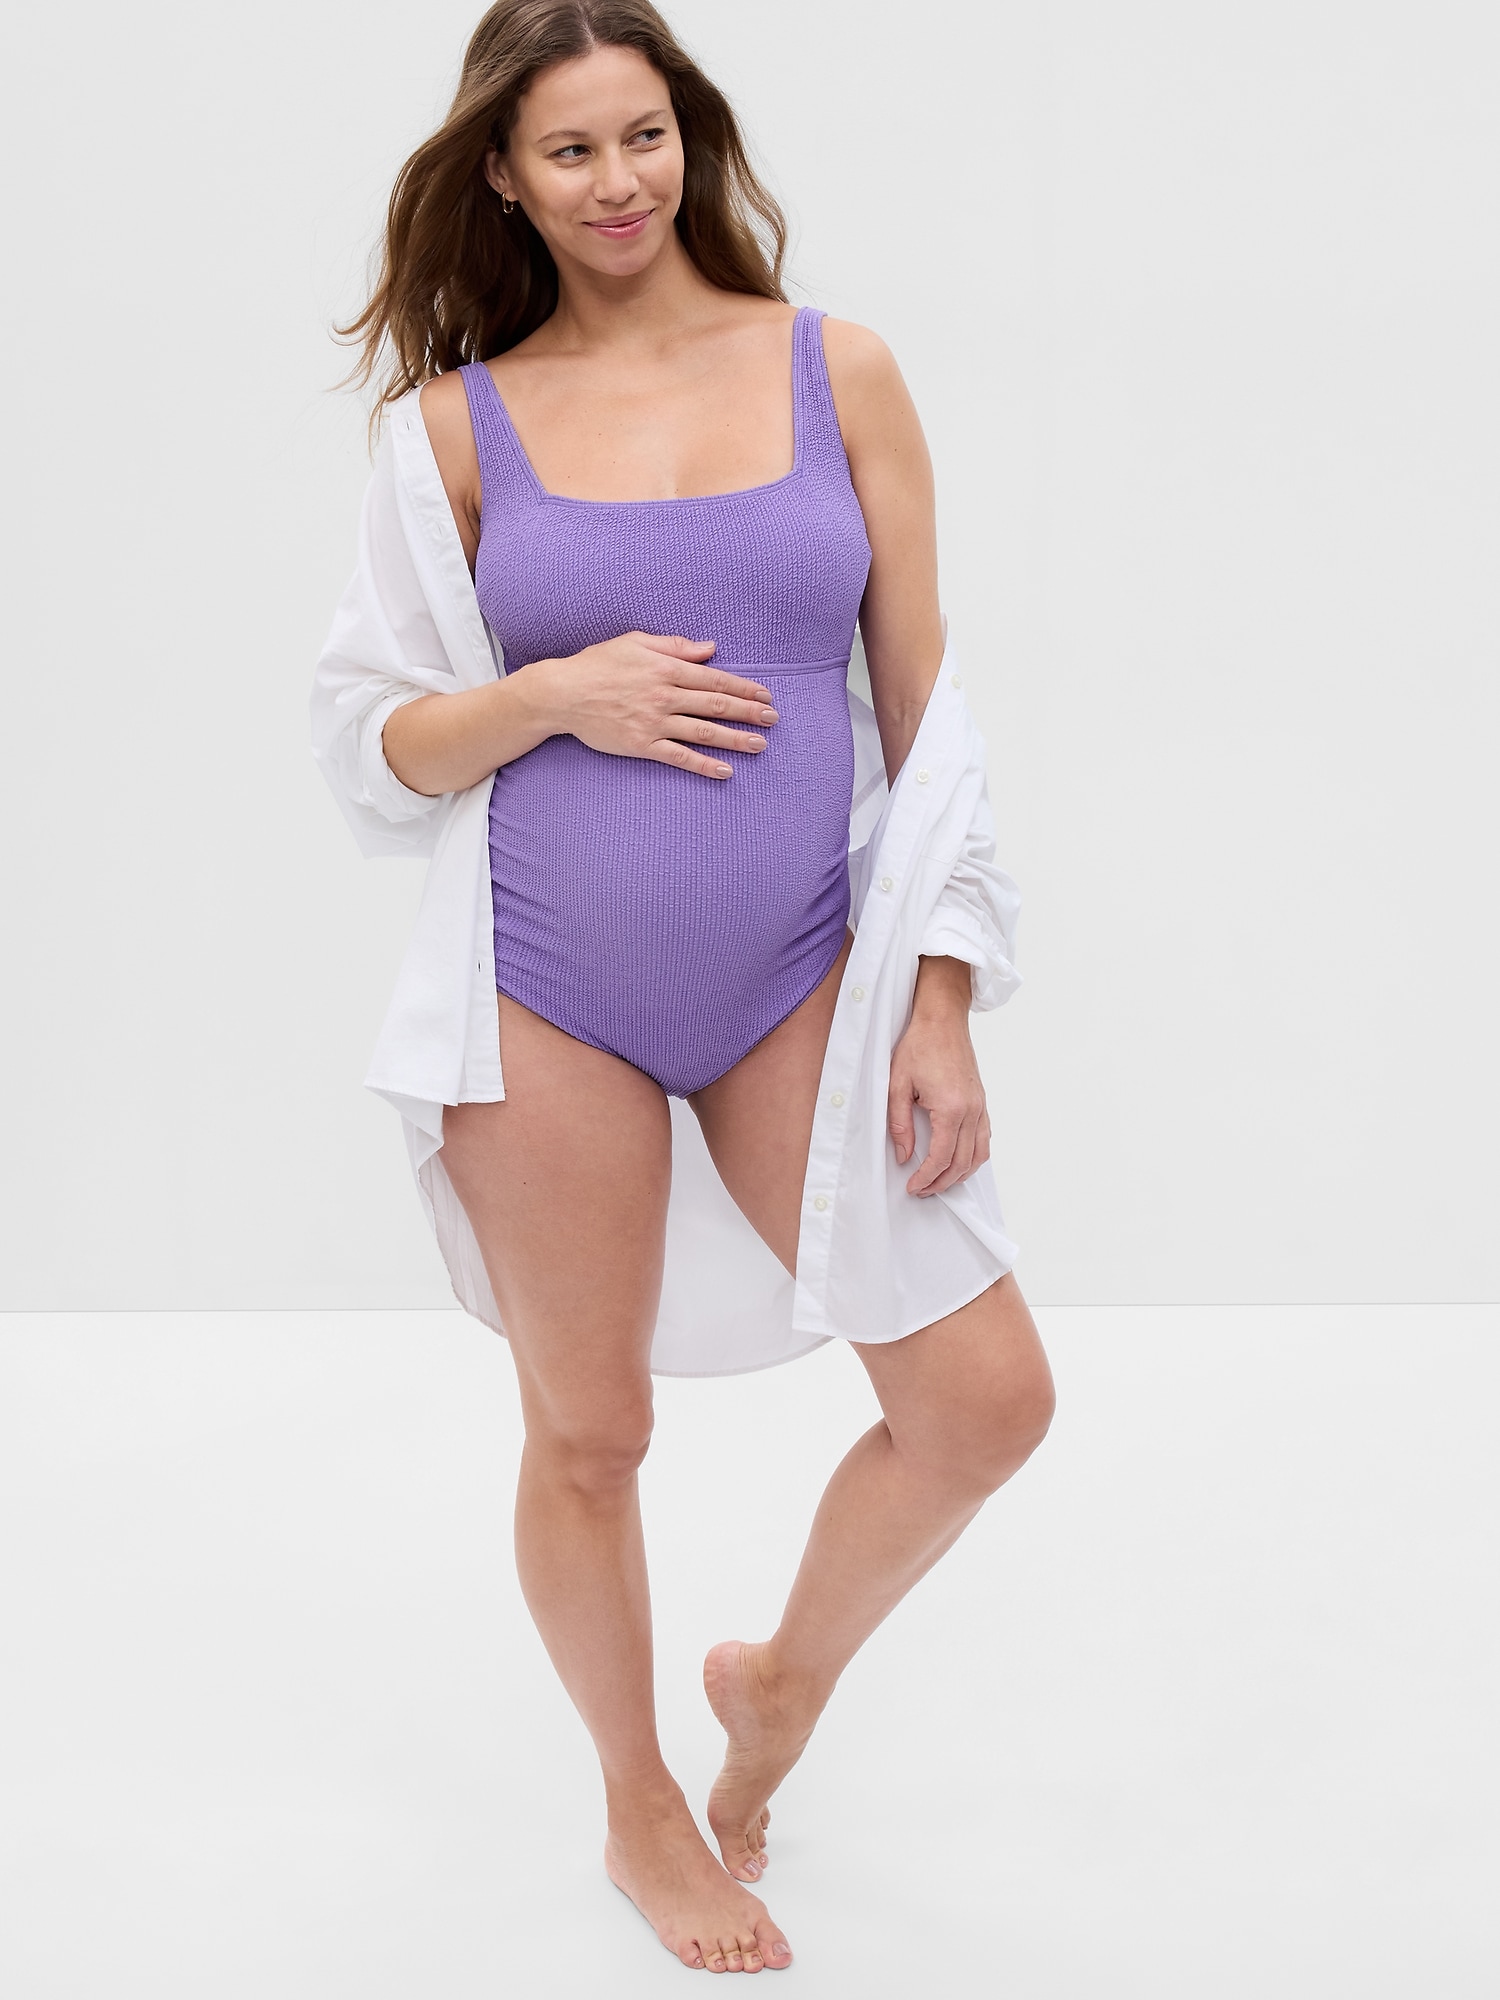 Maternity Swimwear from D to O cup